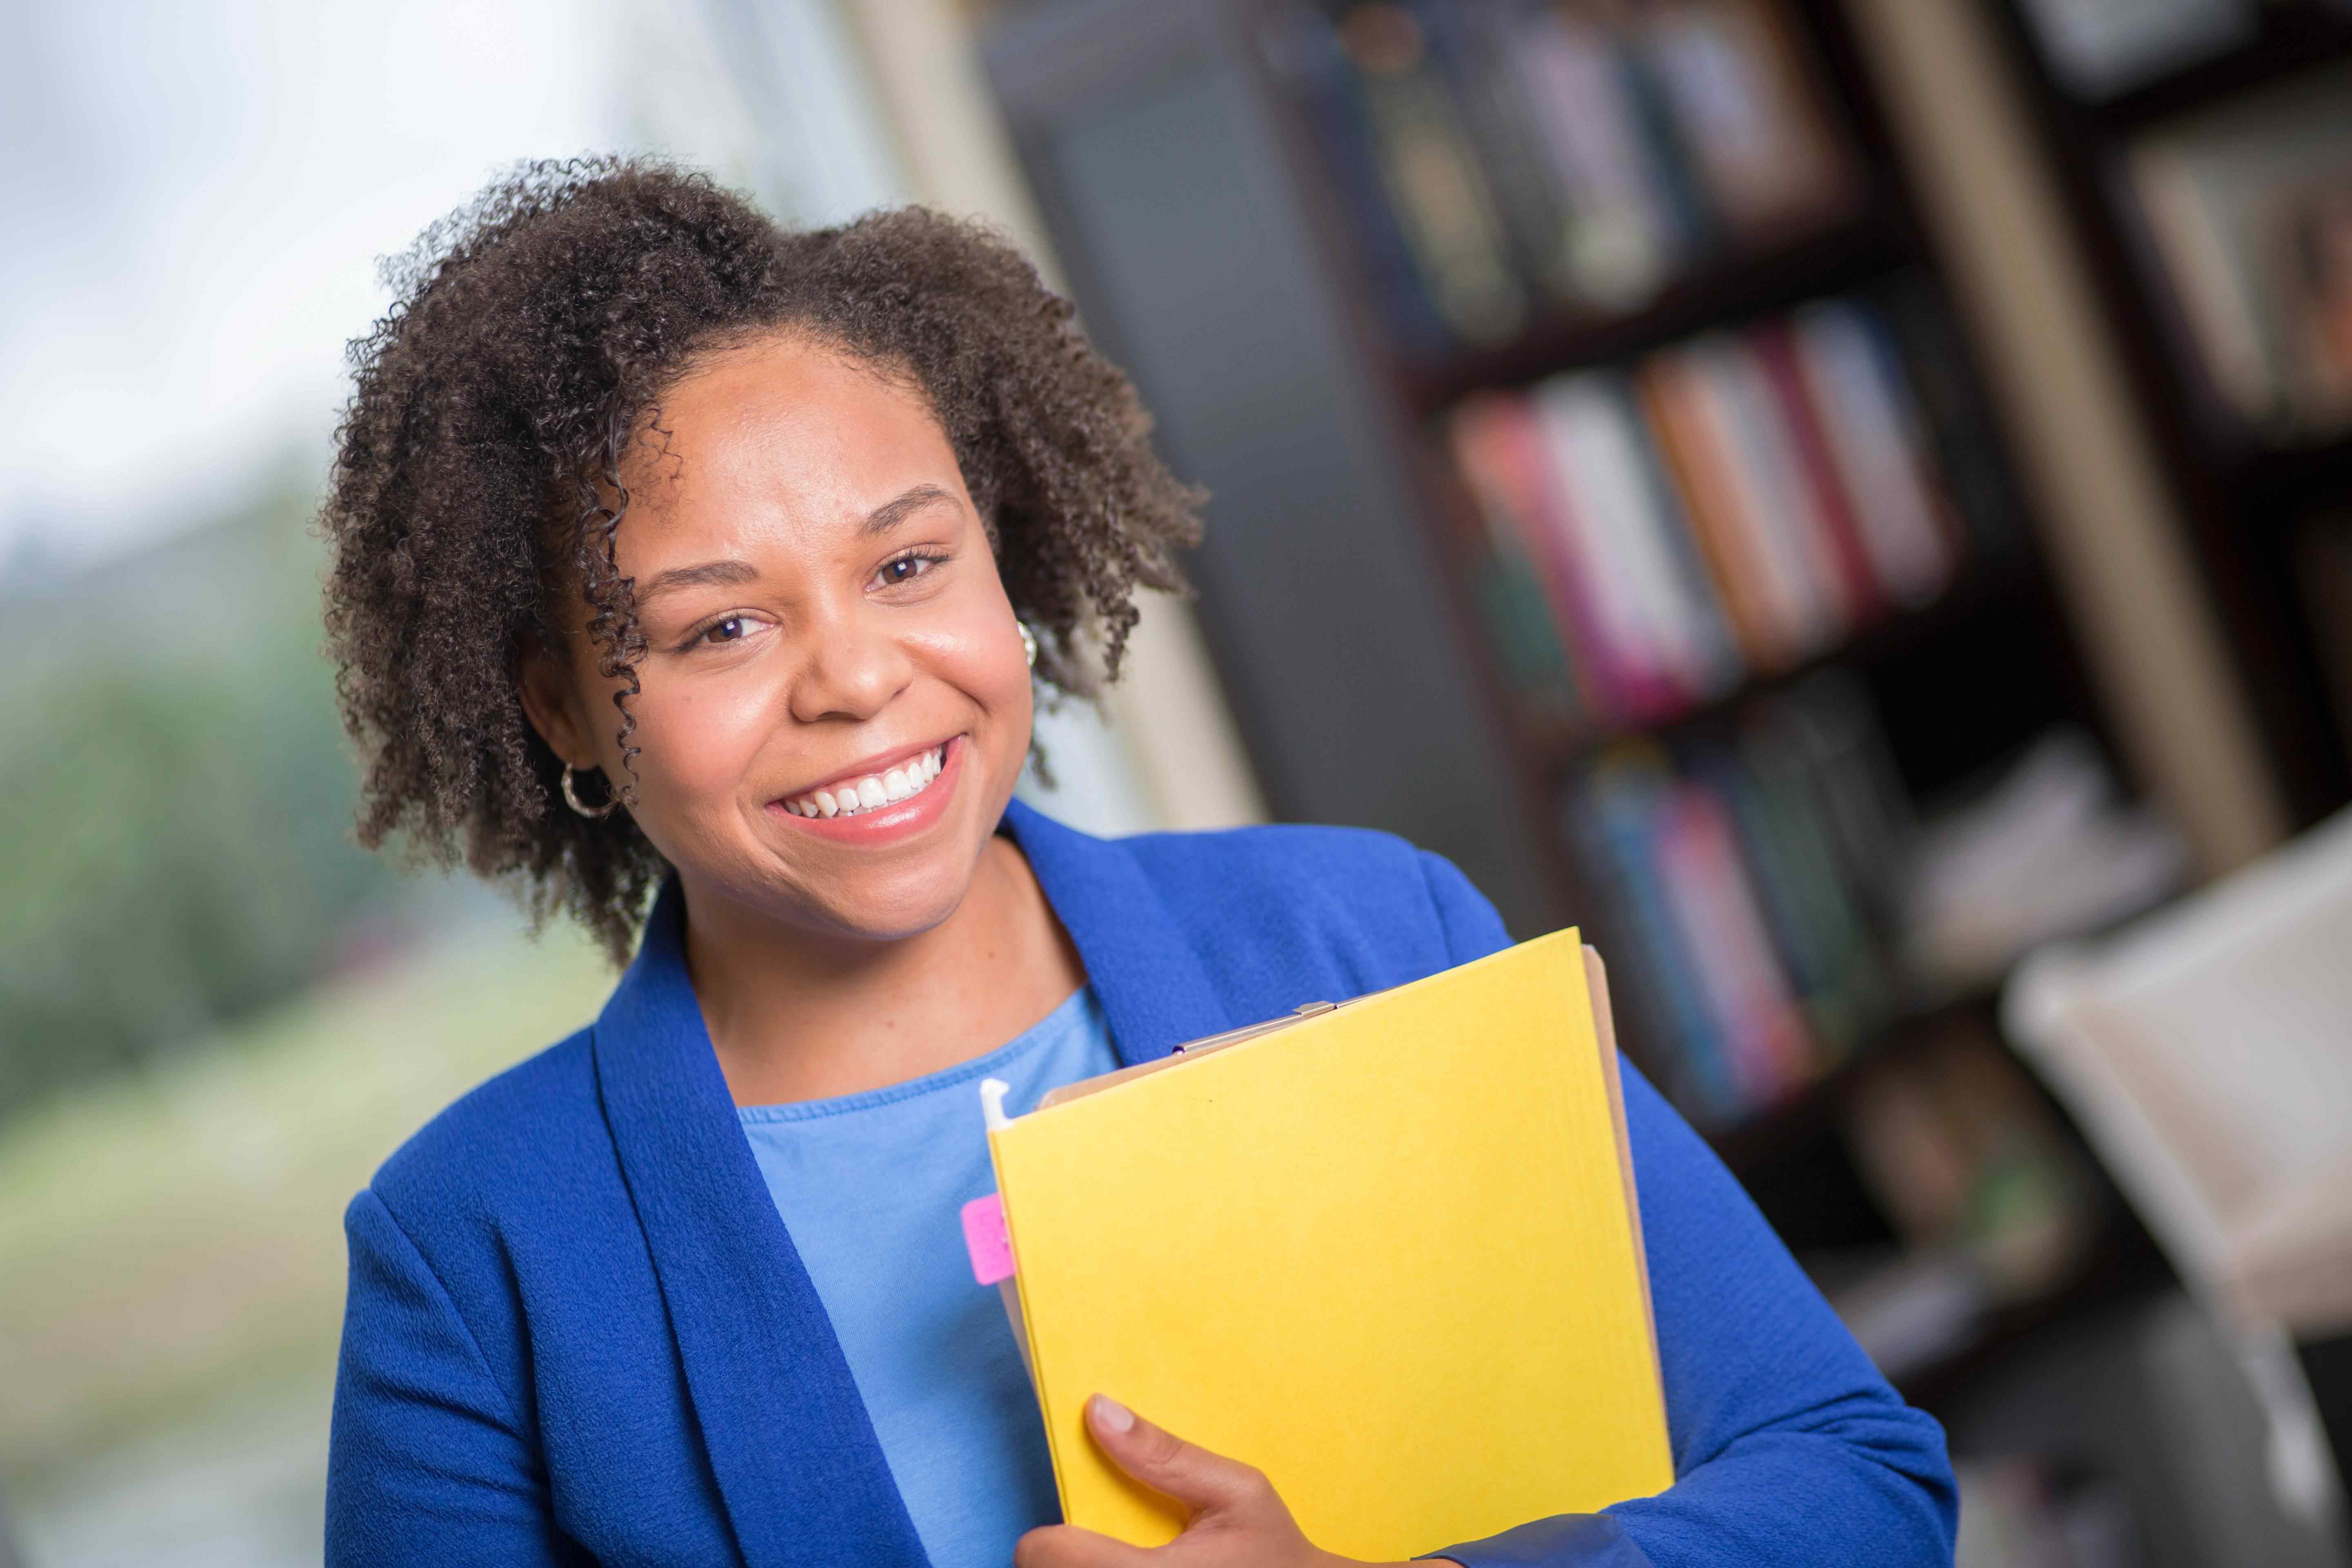 Female business student smiling and holding files.